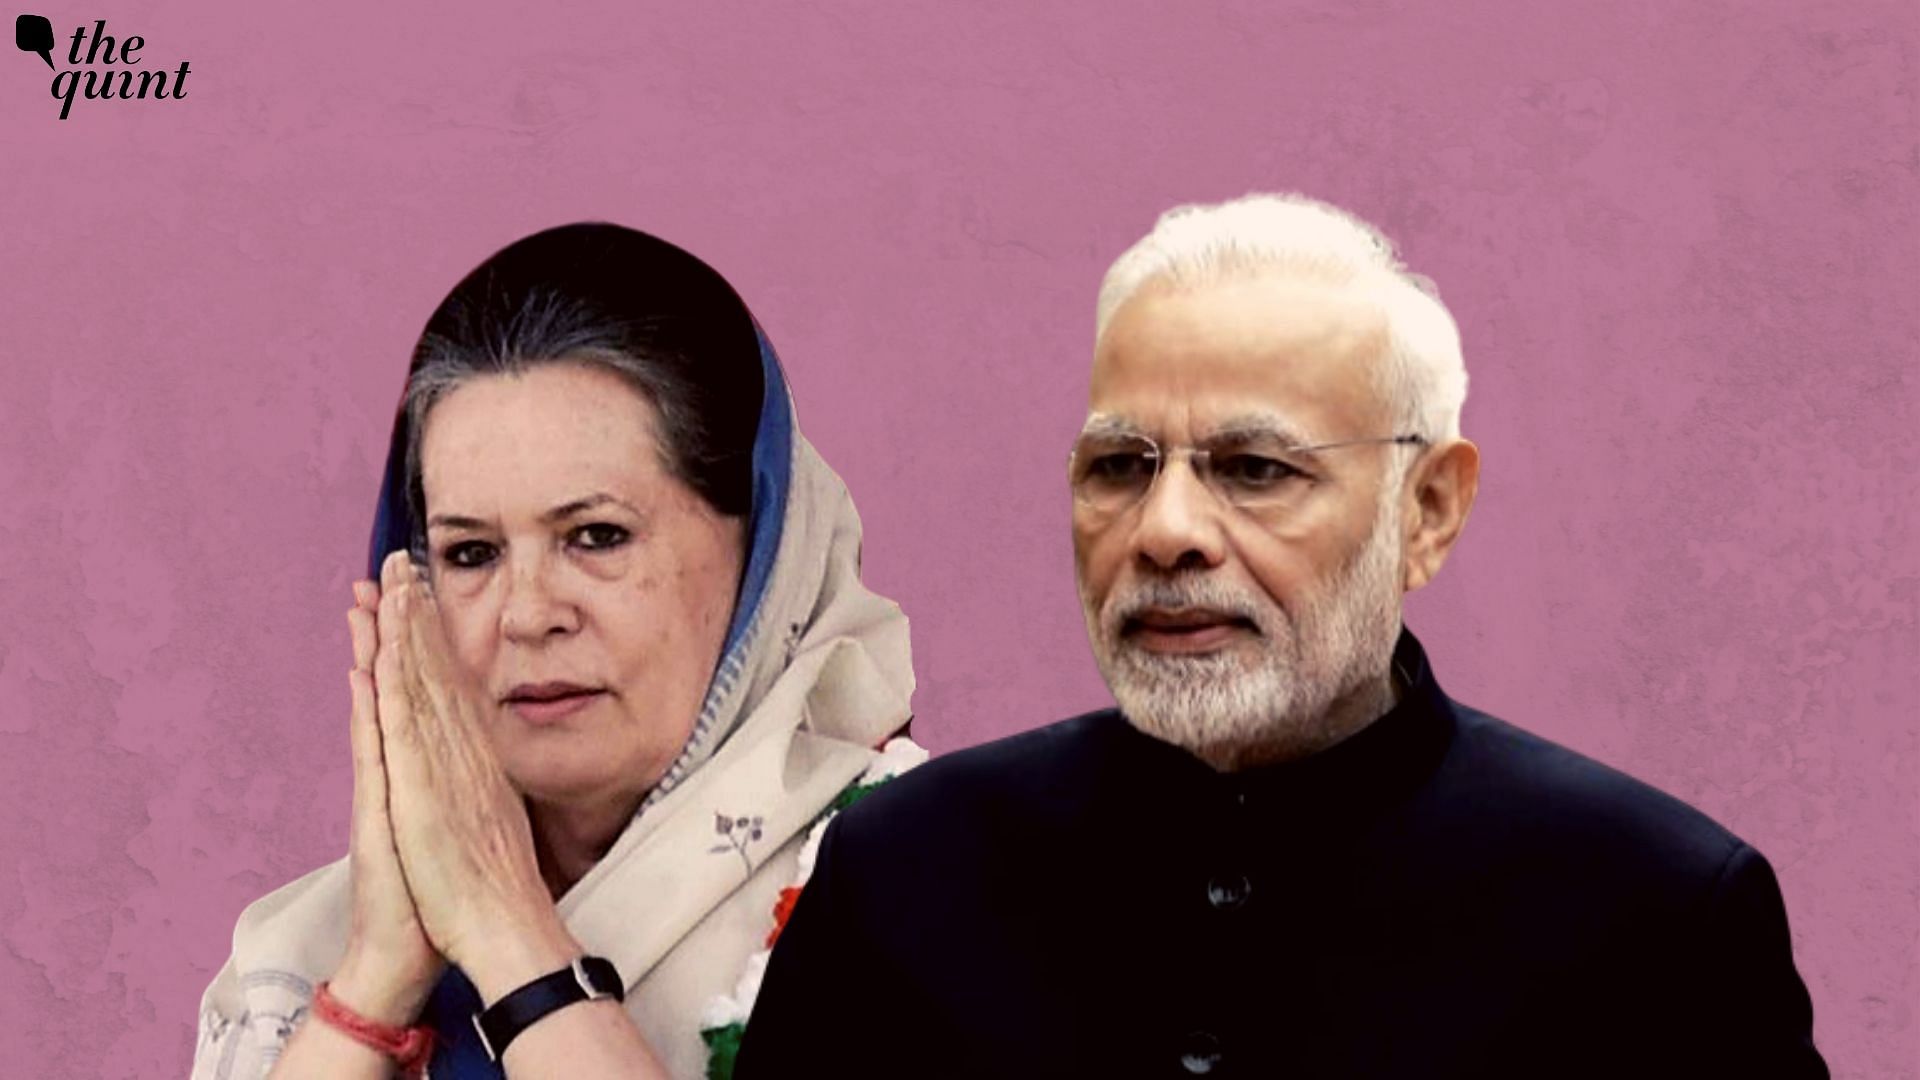 Congress President Sonia Gandhi on 7 April, Tuesday wrote to Prime Minister Narendra Modi suggesting five measures to conserve money for the fight against COVID-19.